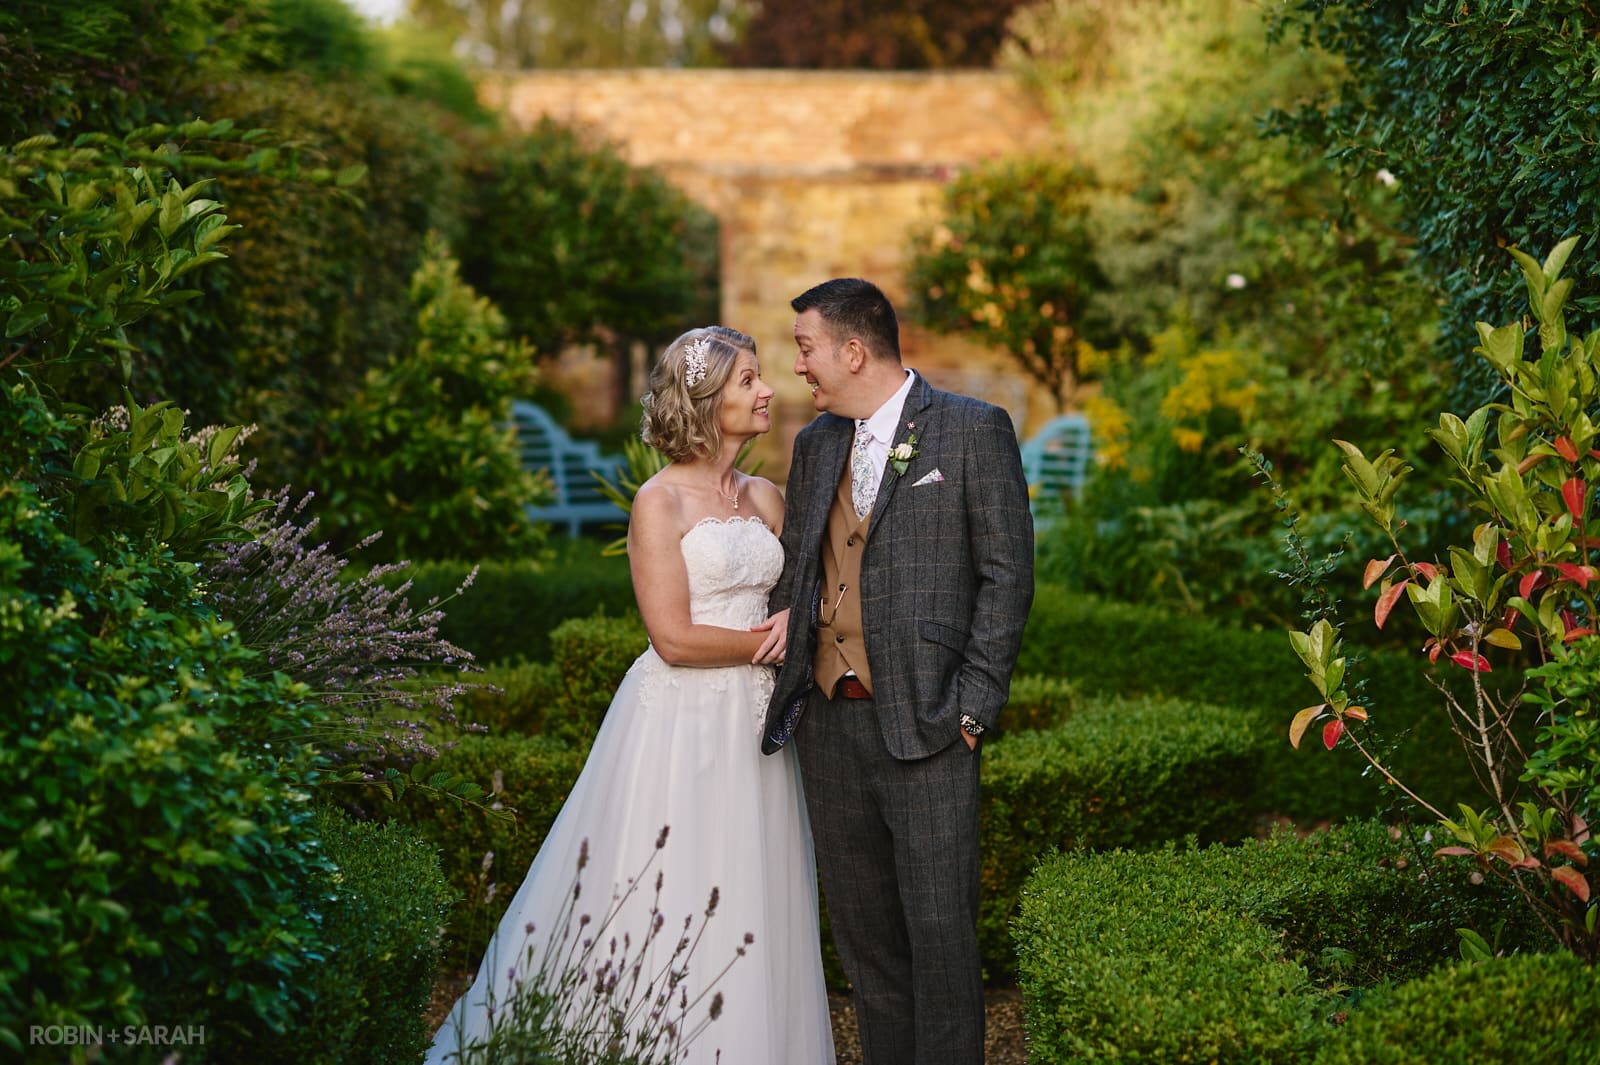 Bride and groom in grounds at wedding venue in beautiful evening light